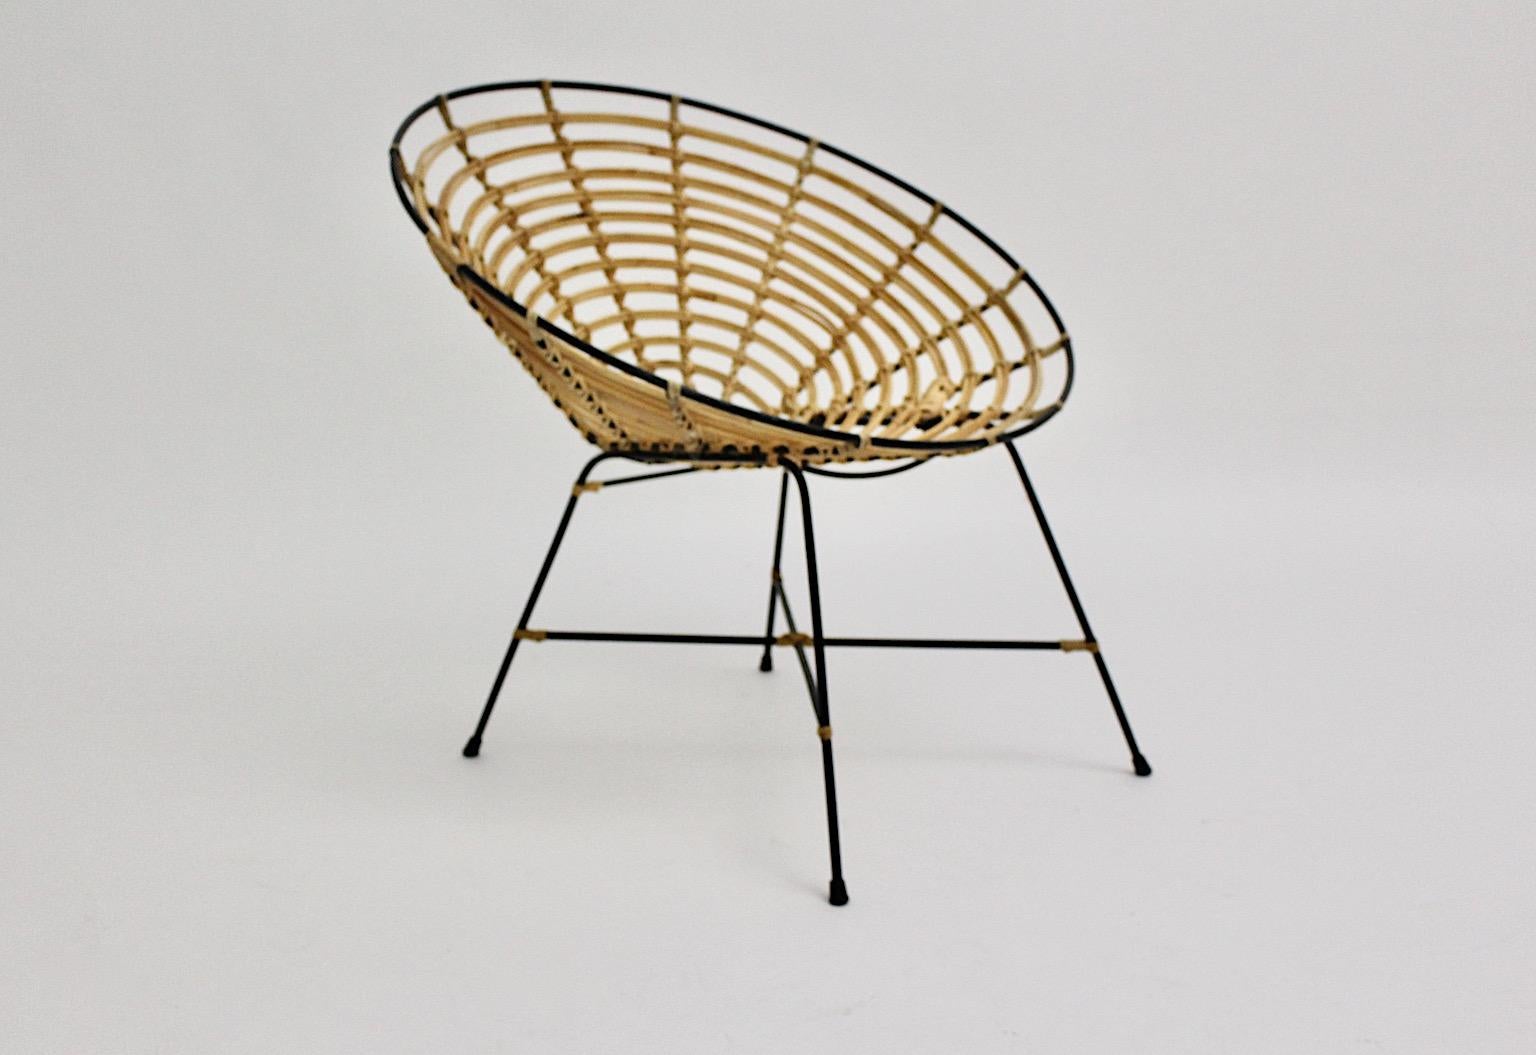 A bamboo rattan brown vintage Mid-Century Modern lounge chair, which was designed and manufactured in Italy, 1960s.
The openwork Riviera style bamboo seat shell and a black lacquered metal frame finish the livable and natural design.
With this